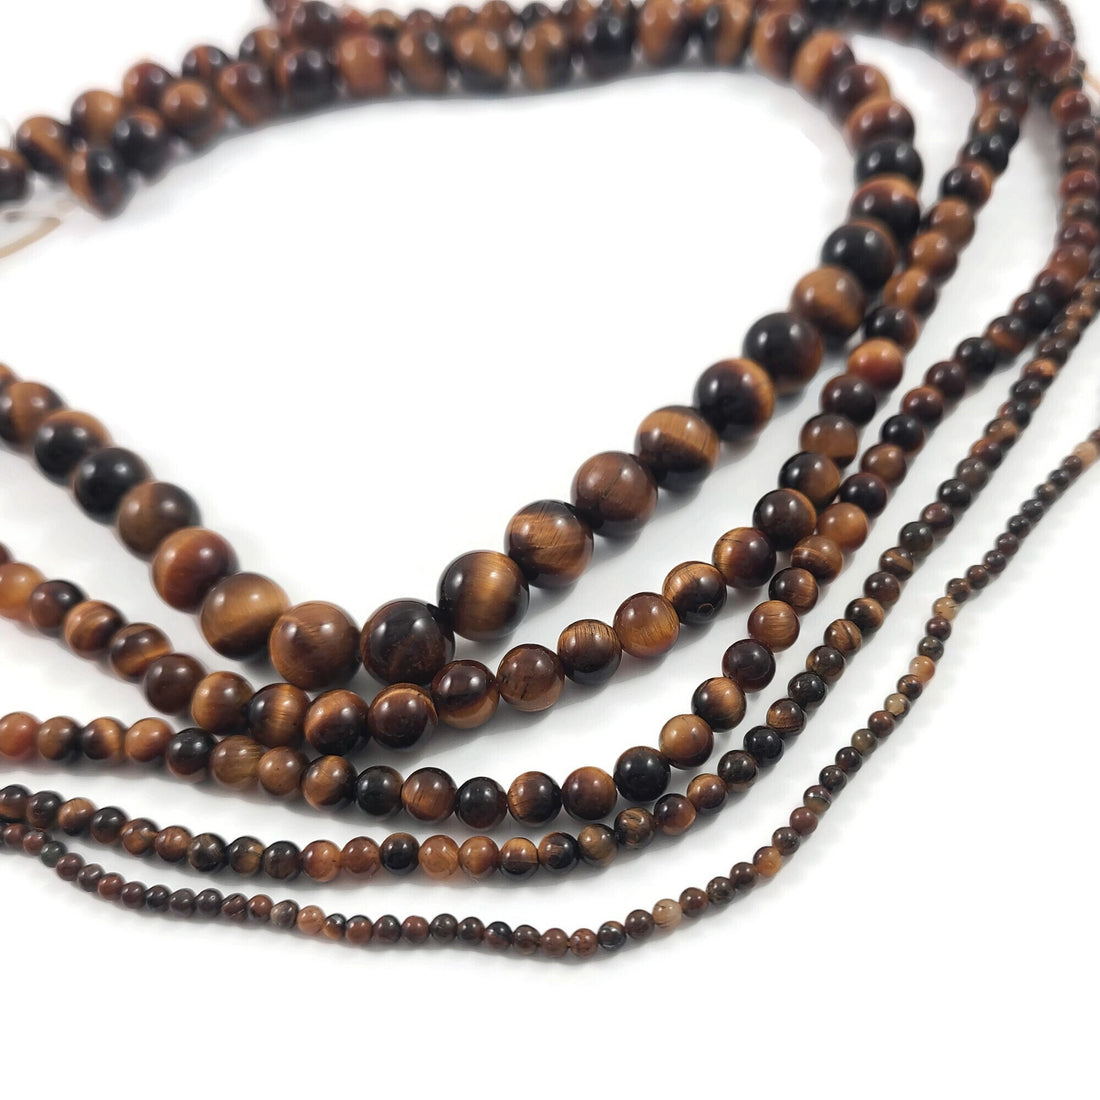 Tiger Eye Beads, 2mm 3mm 4mm 6mm 8mm, Natural round gemstone for jewelry making